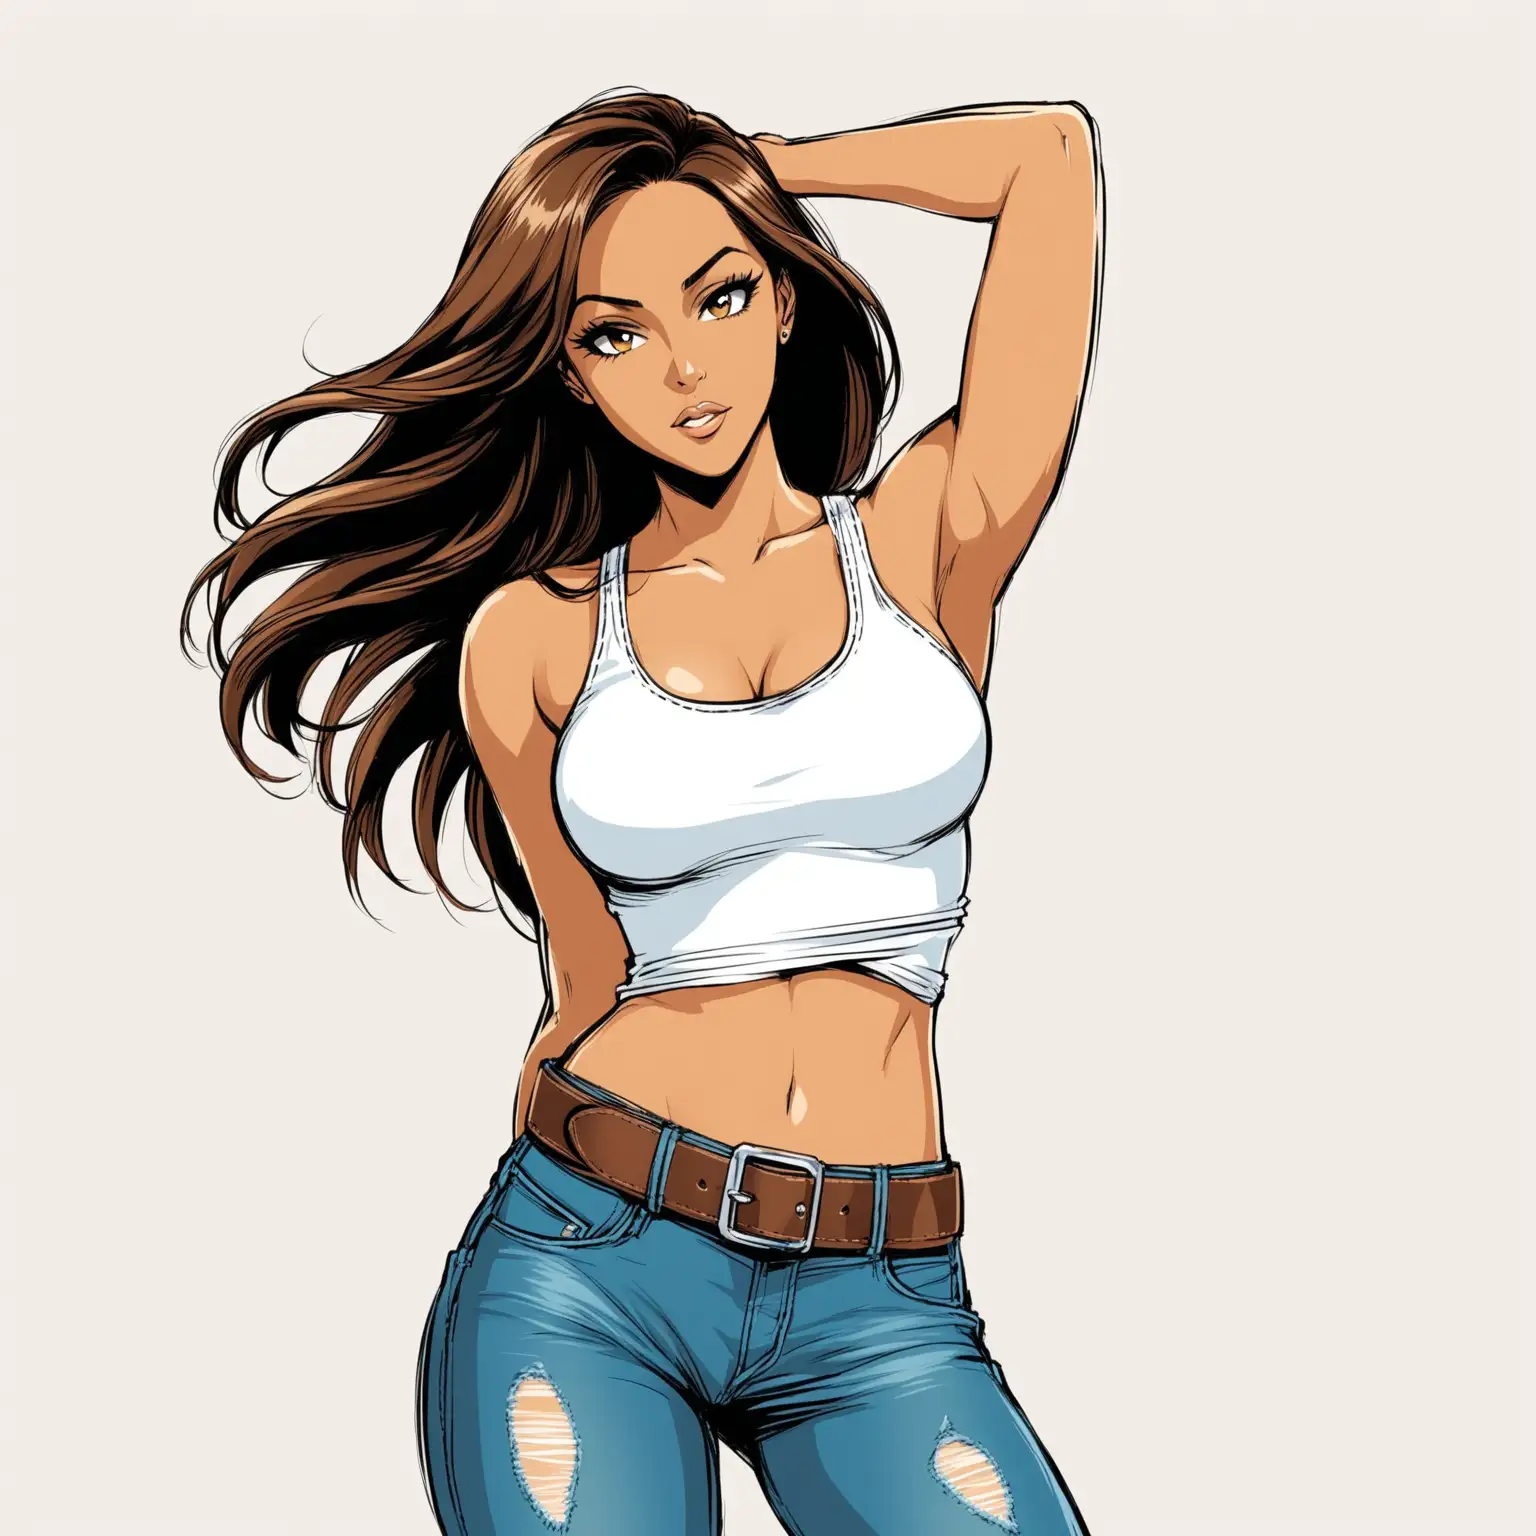 Fashionable Woman Removing White Tank Top to Reveal Black Bra in Comic Book Style